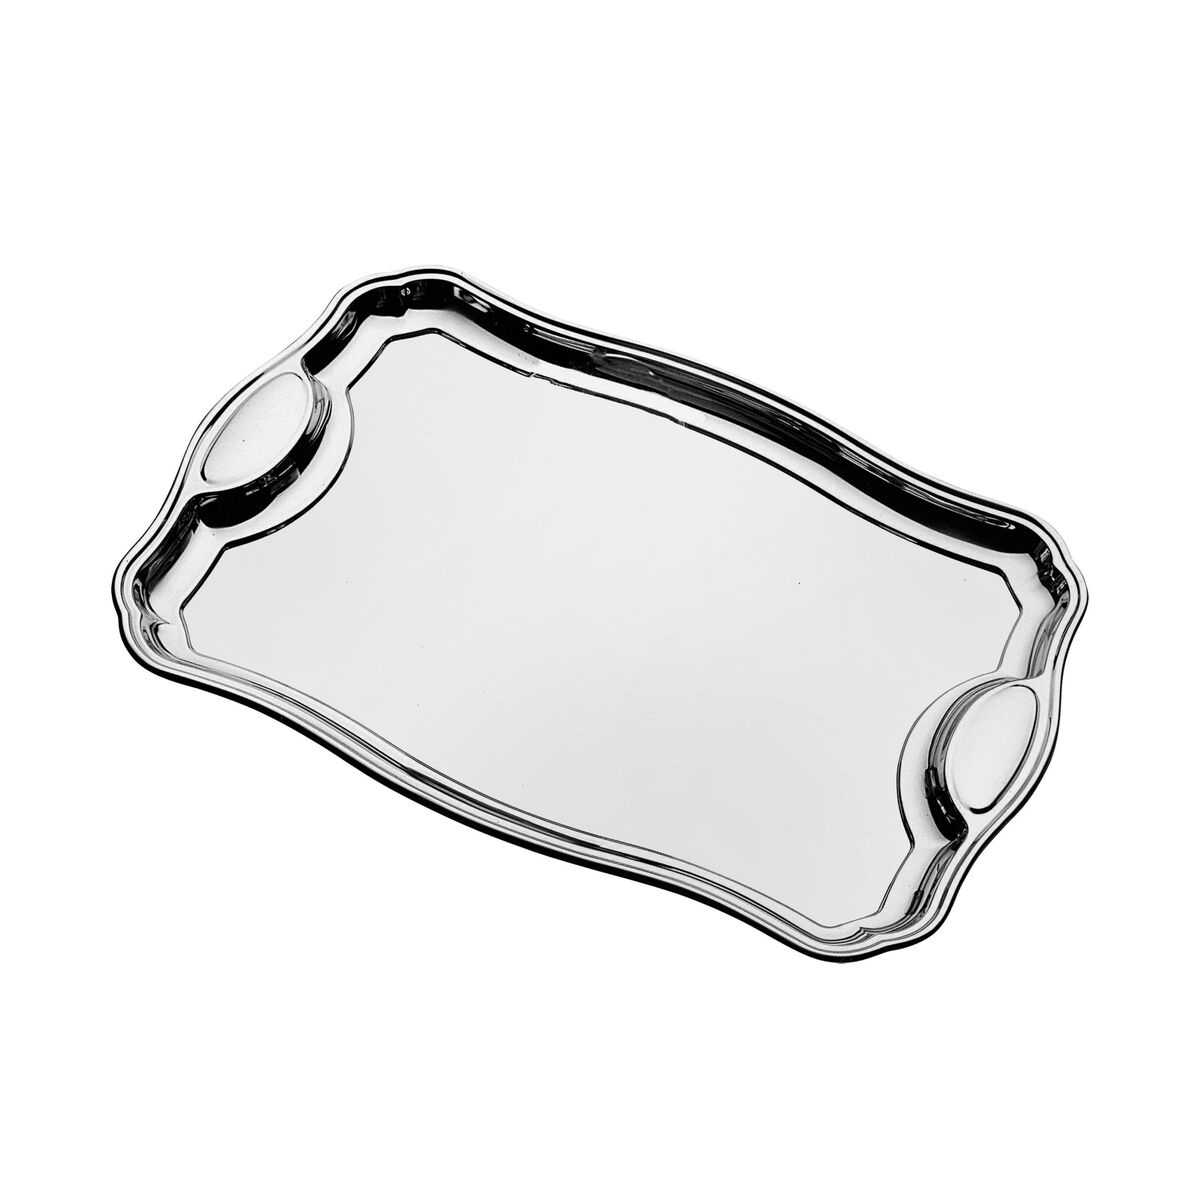 Tramontina Classic rectangular stainless steel tray with handles, 42 x 29 cm